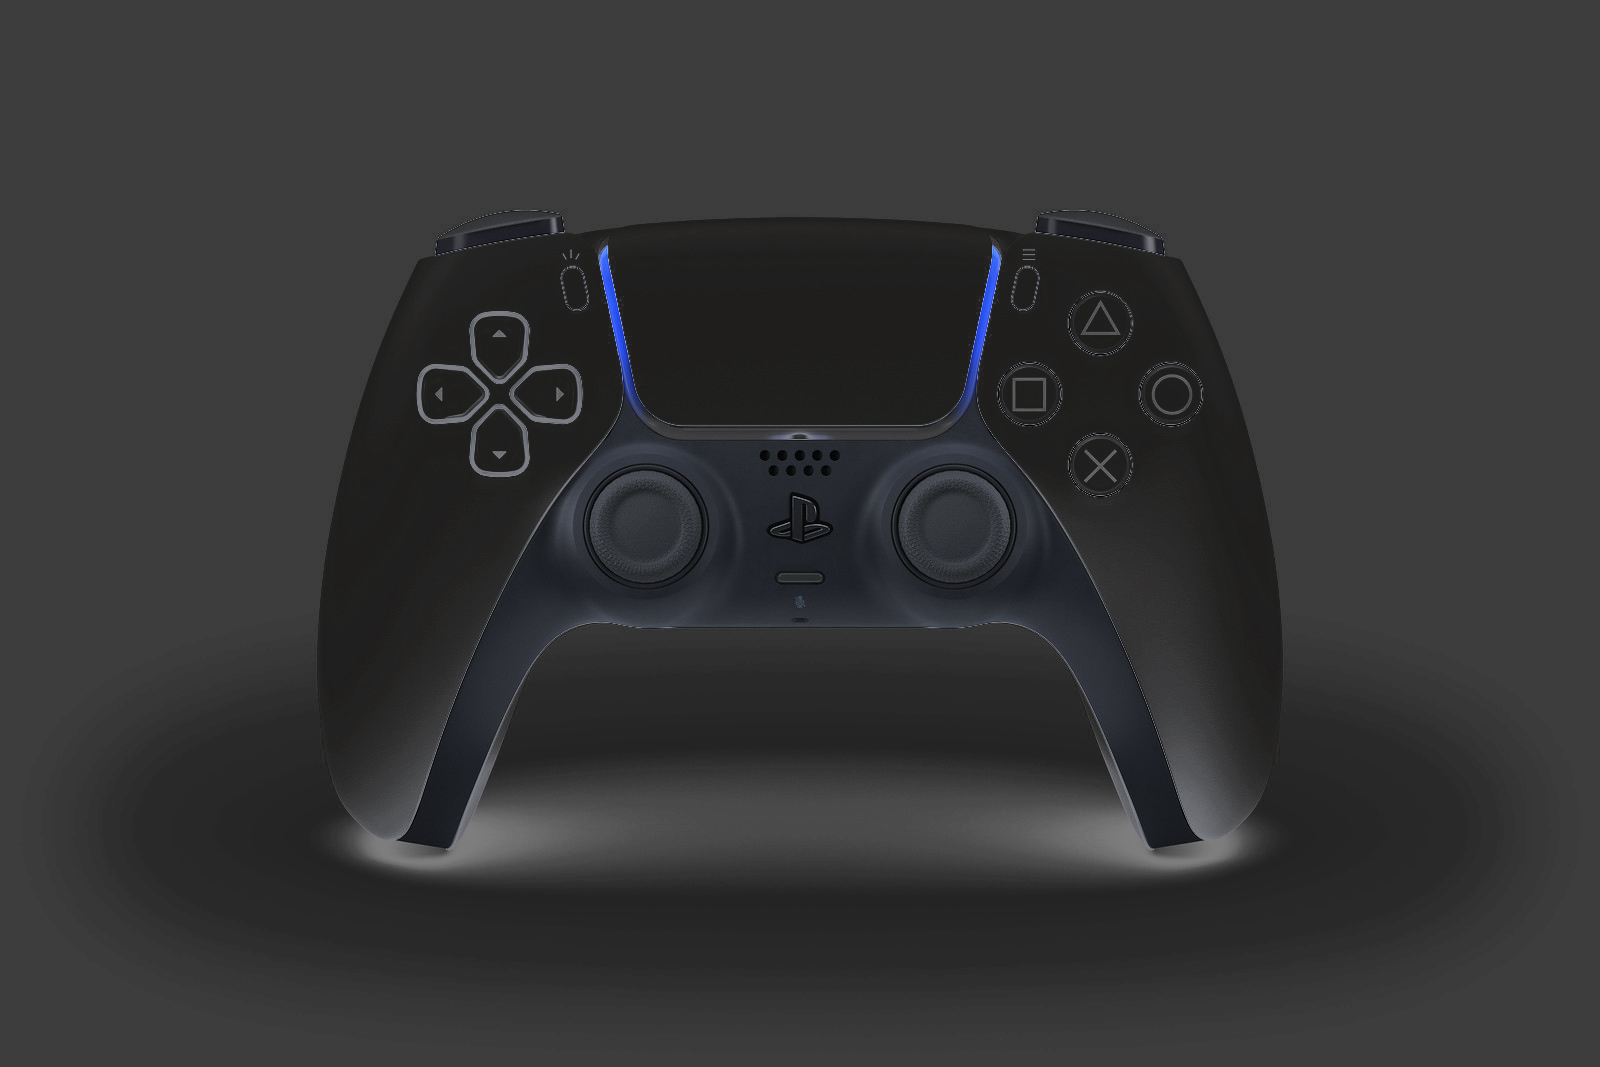 when will the ps5 controller come out